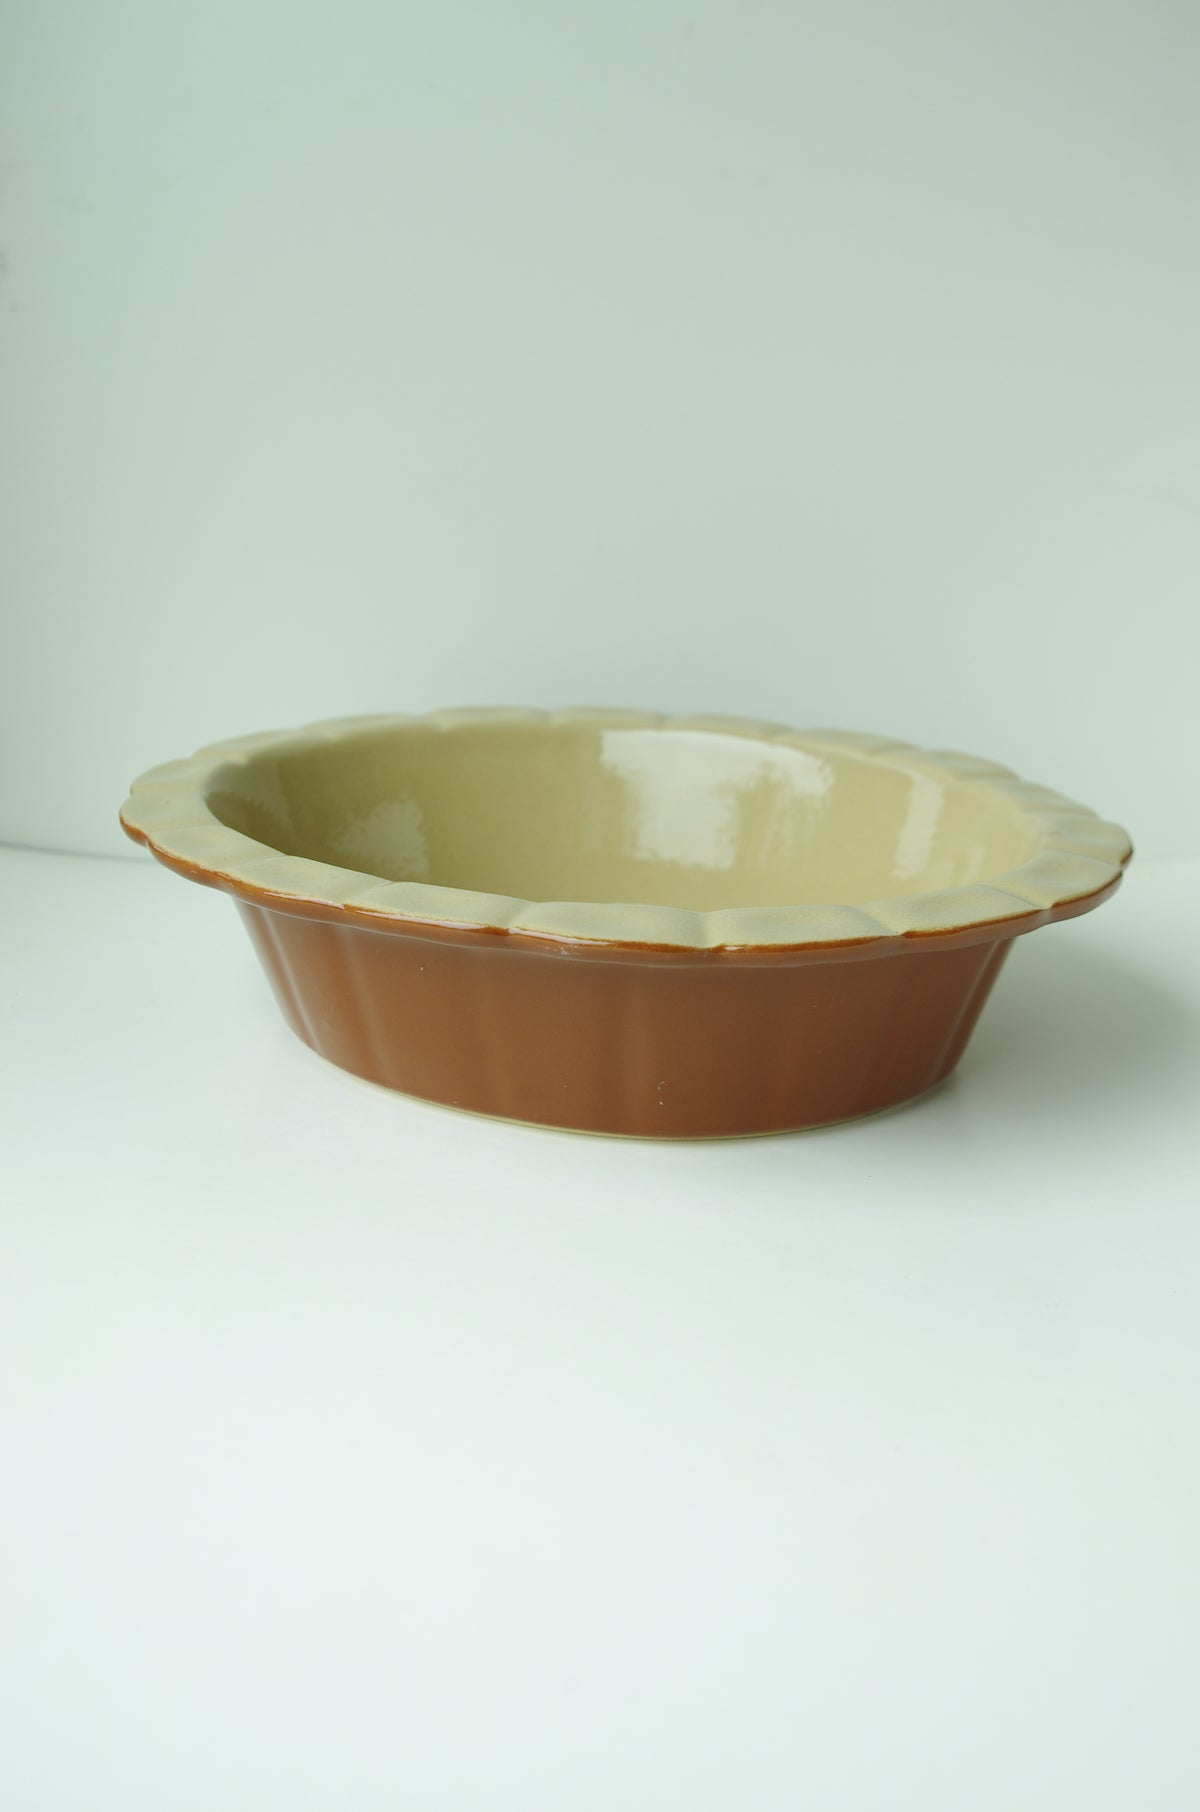 Vintage French Oval Pie Dish